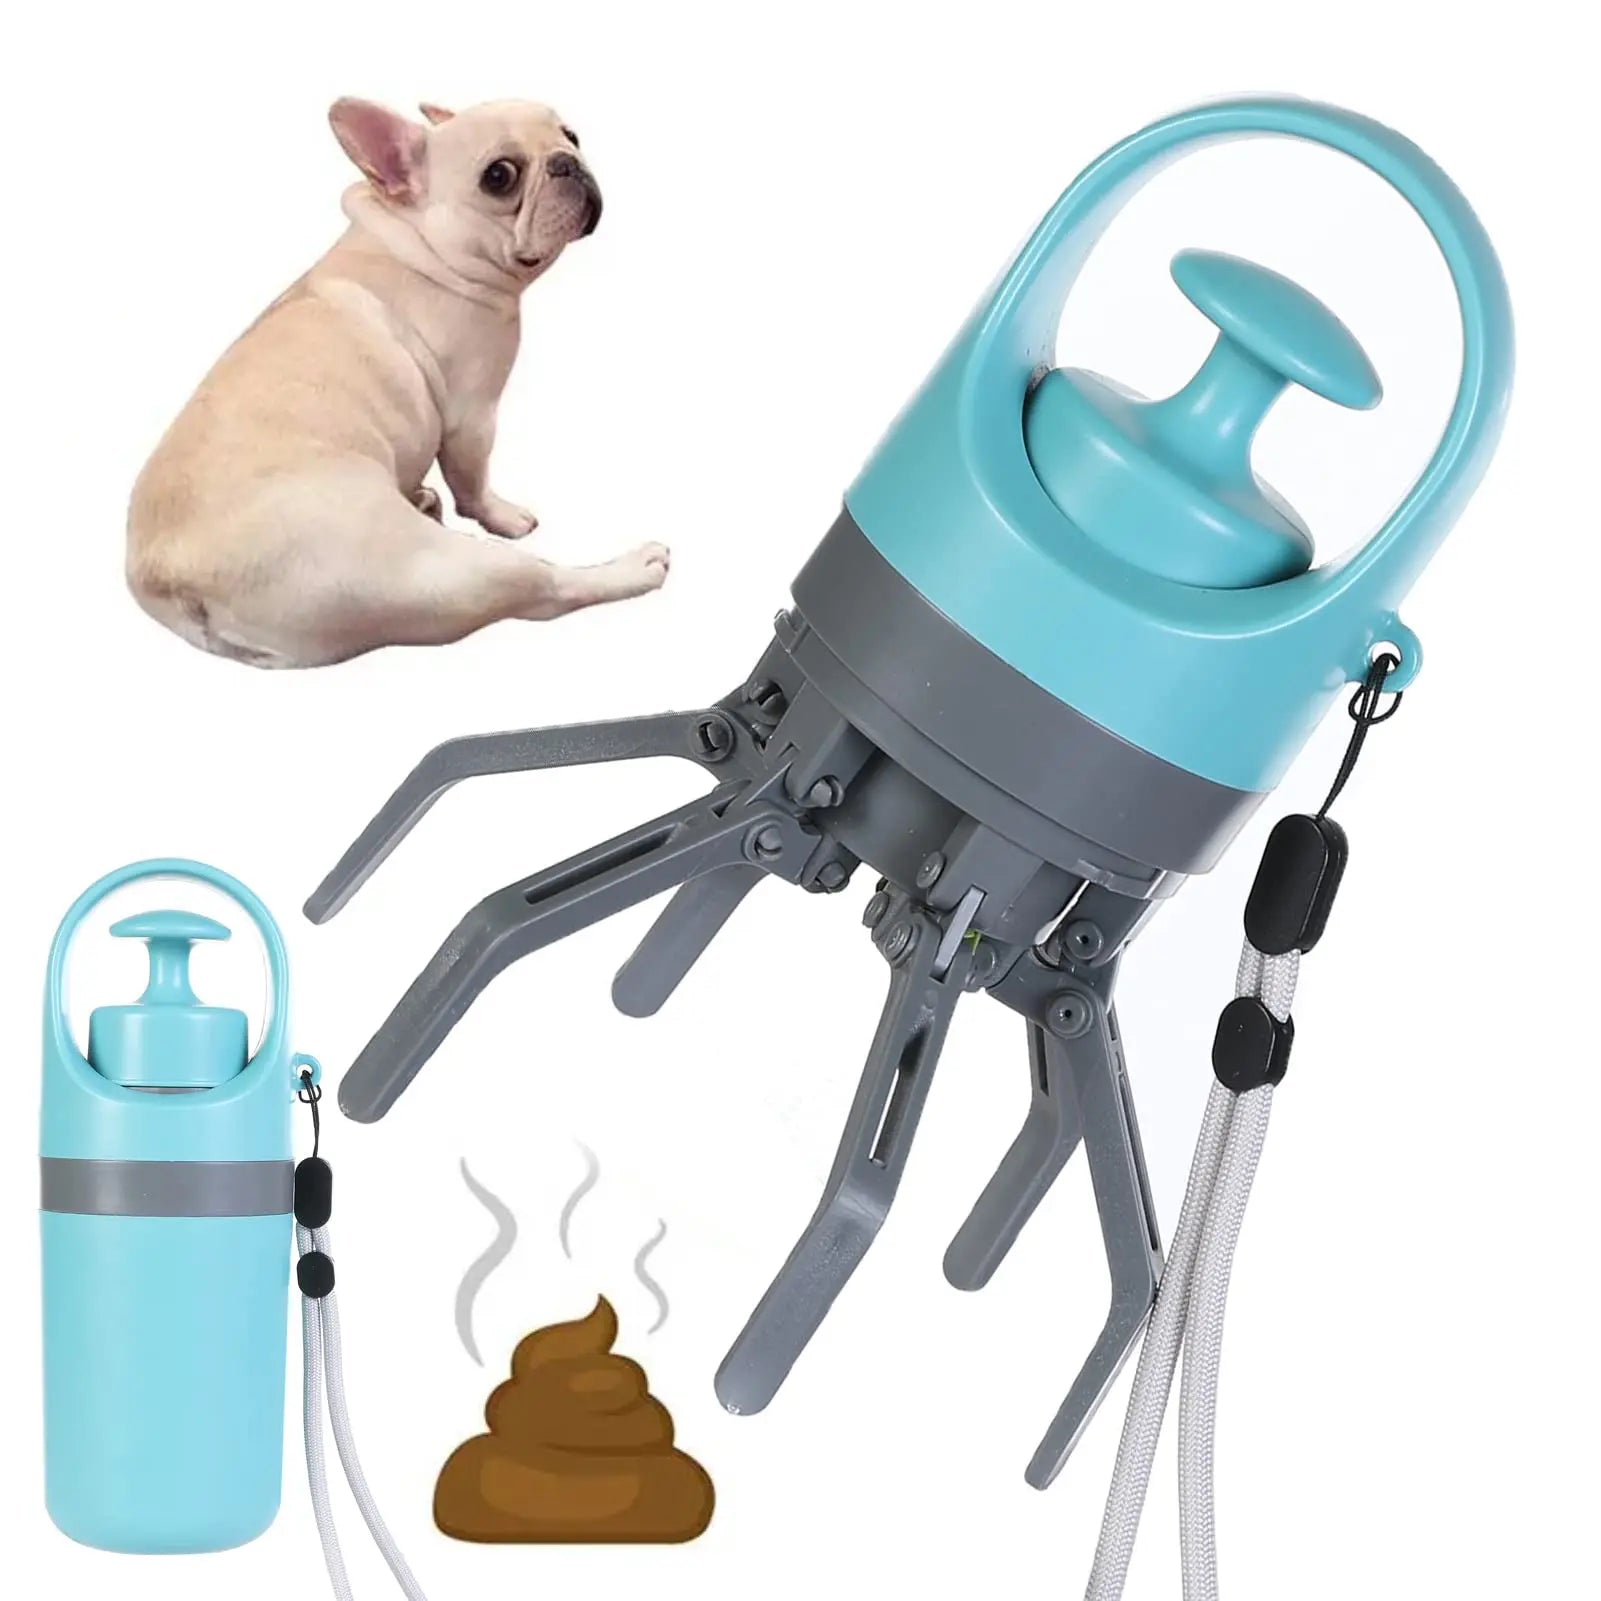 Portable Lightweight Dog Pooper Scooper With Built-in Poop Bag Dispenser Eight-claw Shovel For Pet Toilet Picker Pet Products - Image #1